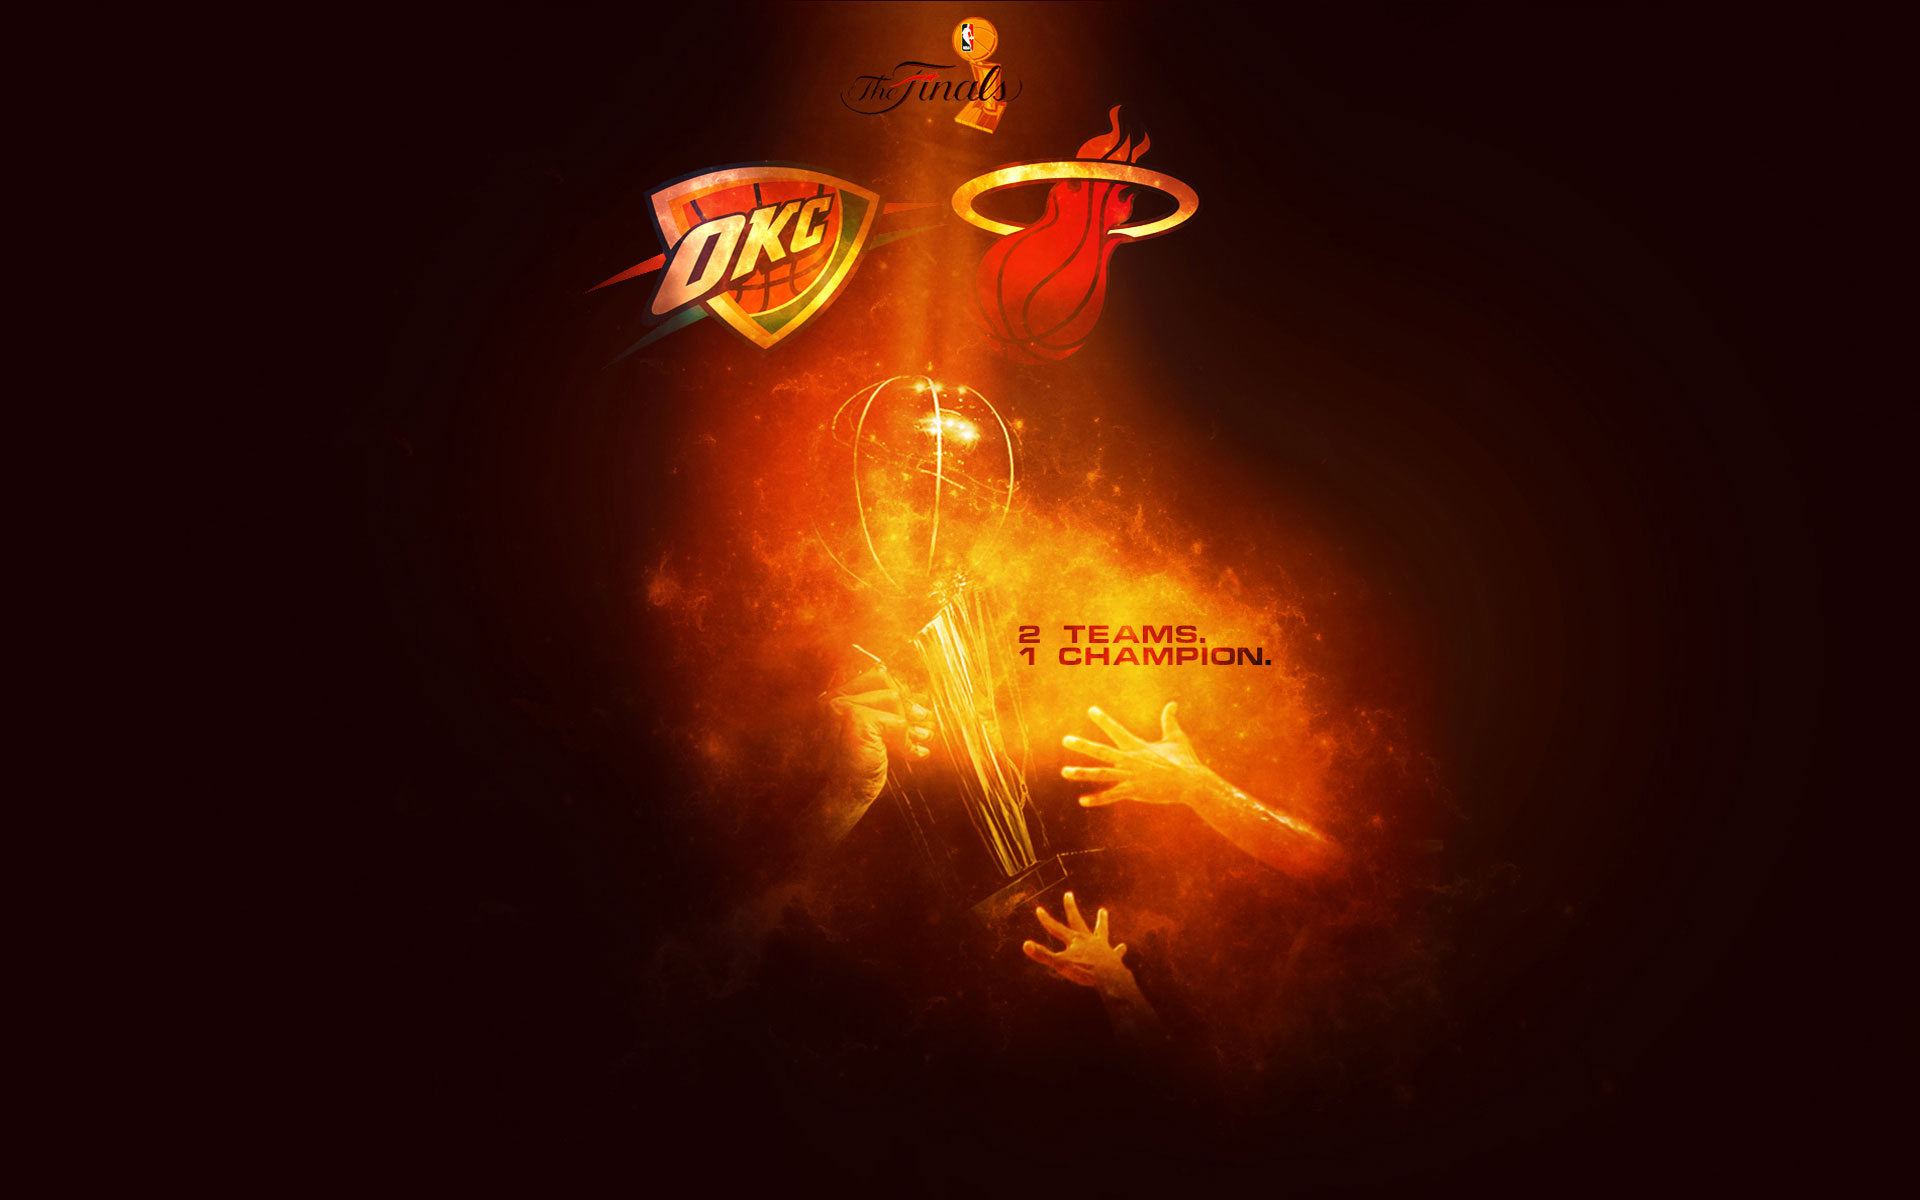 Nba Teams Wallpaper For Iphone 7n4 1920x1200 px 15475 KB Sports 2014